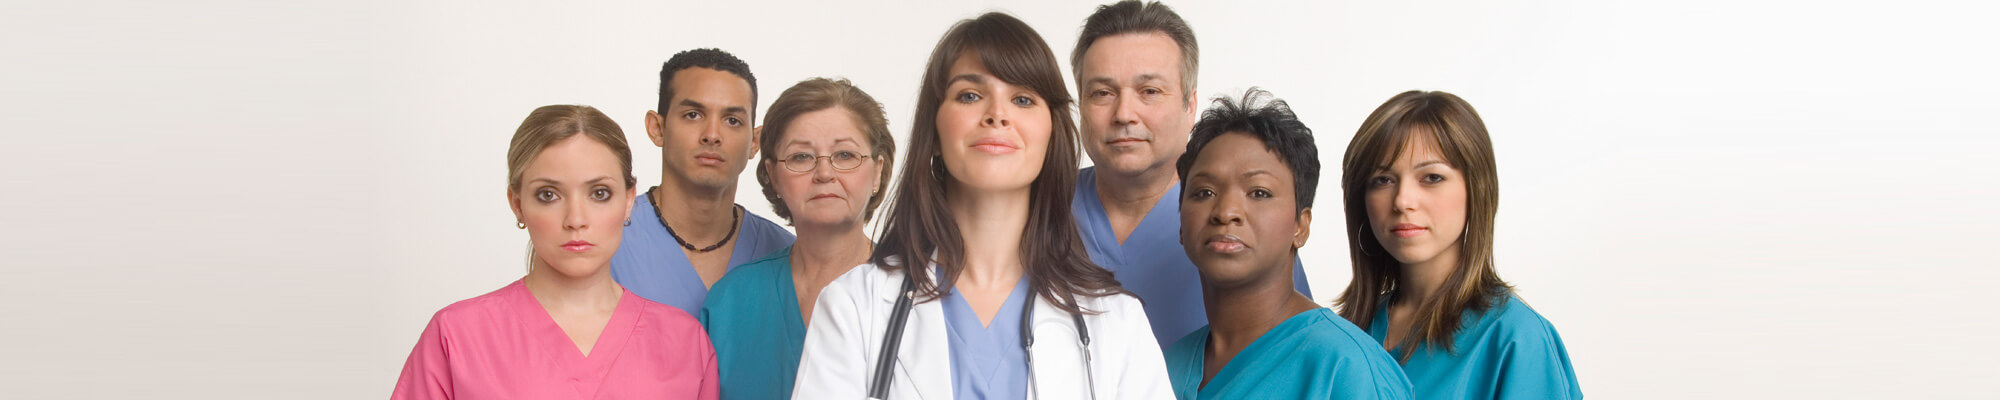 resumes for nurses and other healthcare professionals